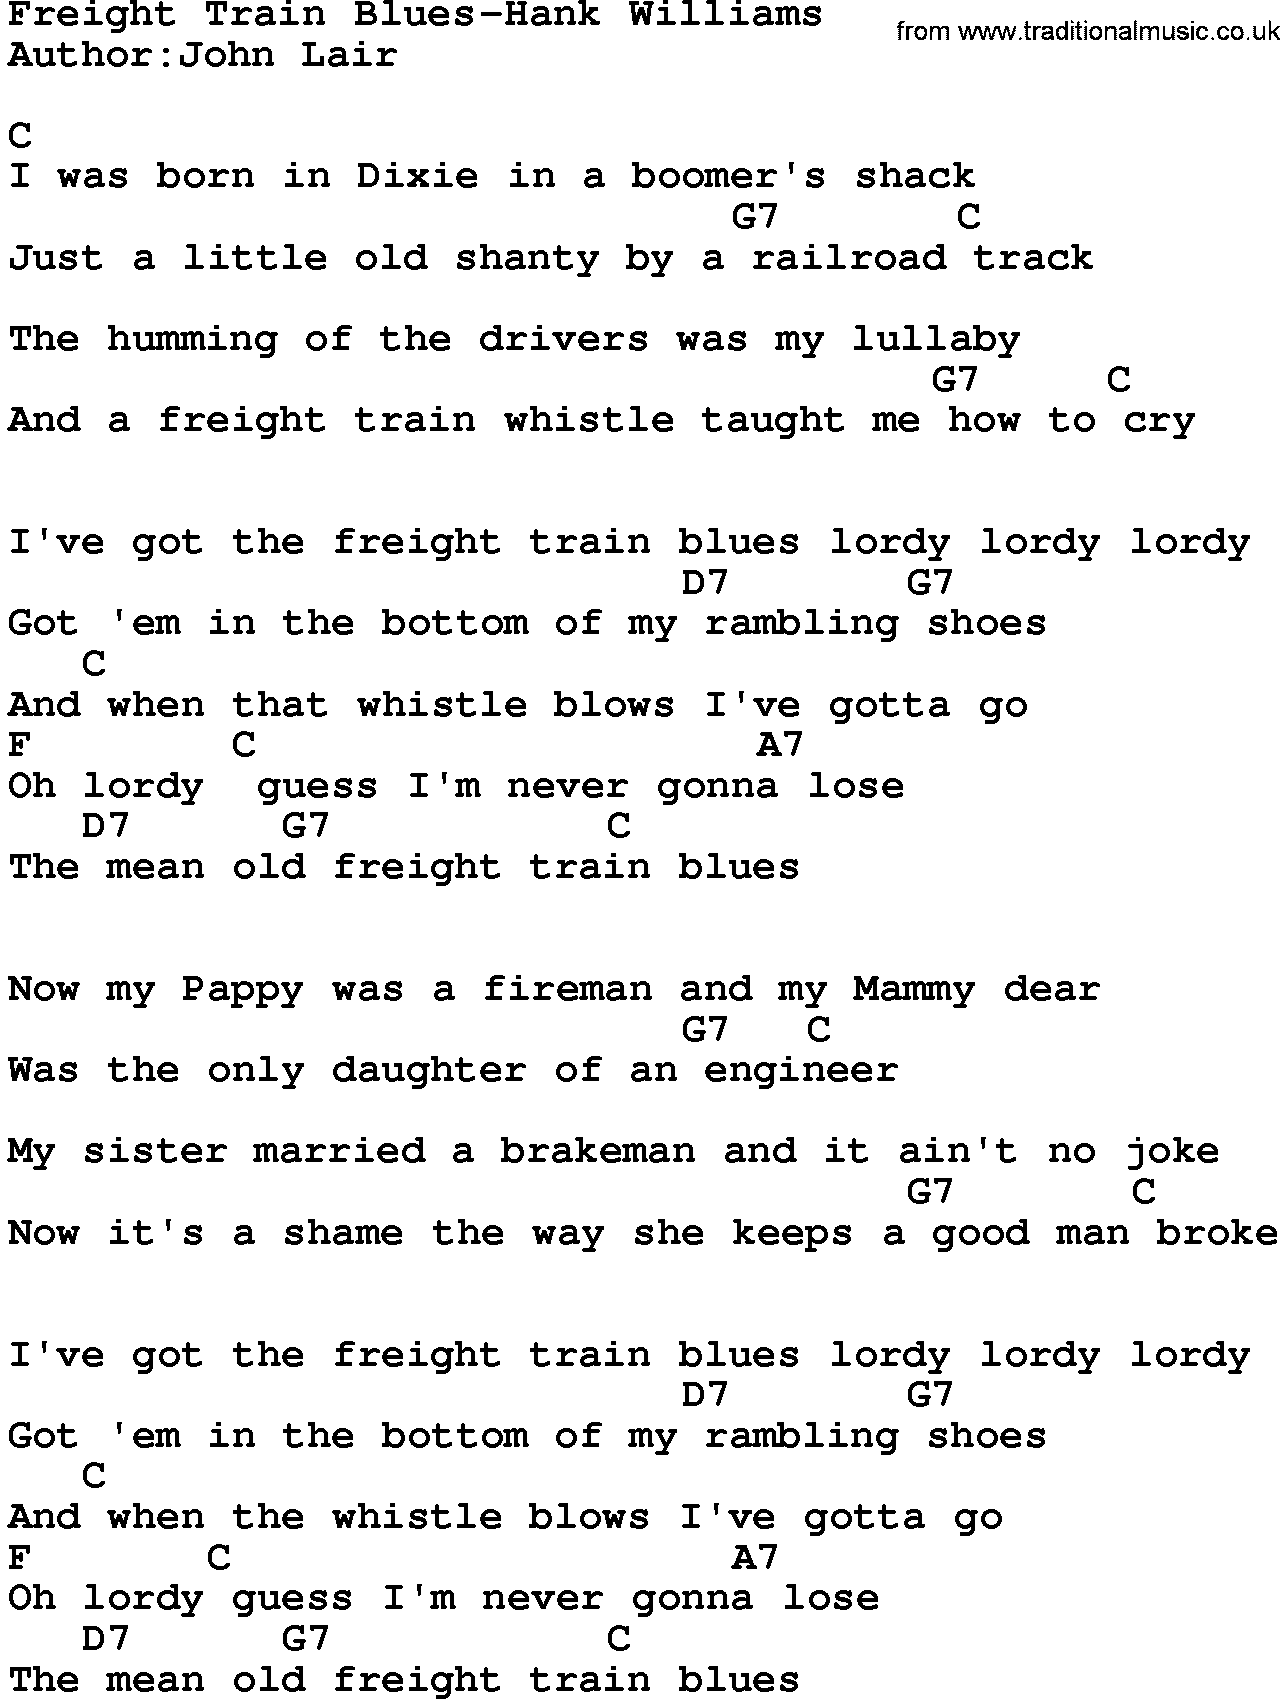 Country music song: Freight Train Blues-Hank Williams lyrics and chords